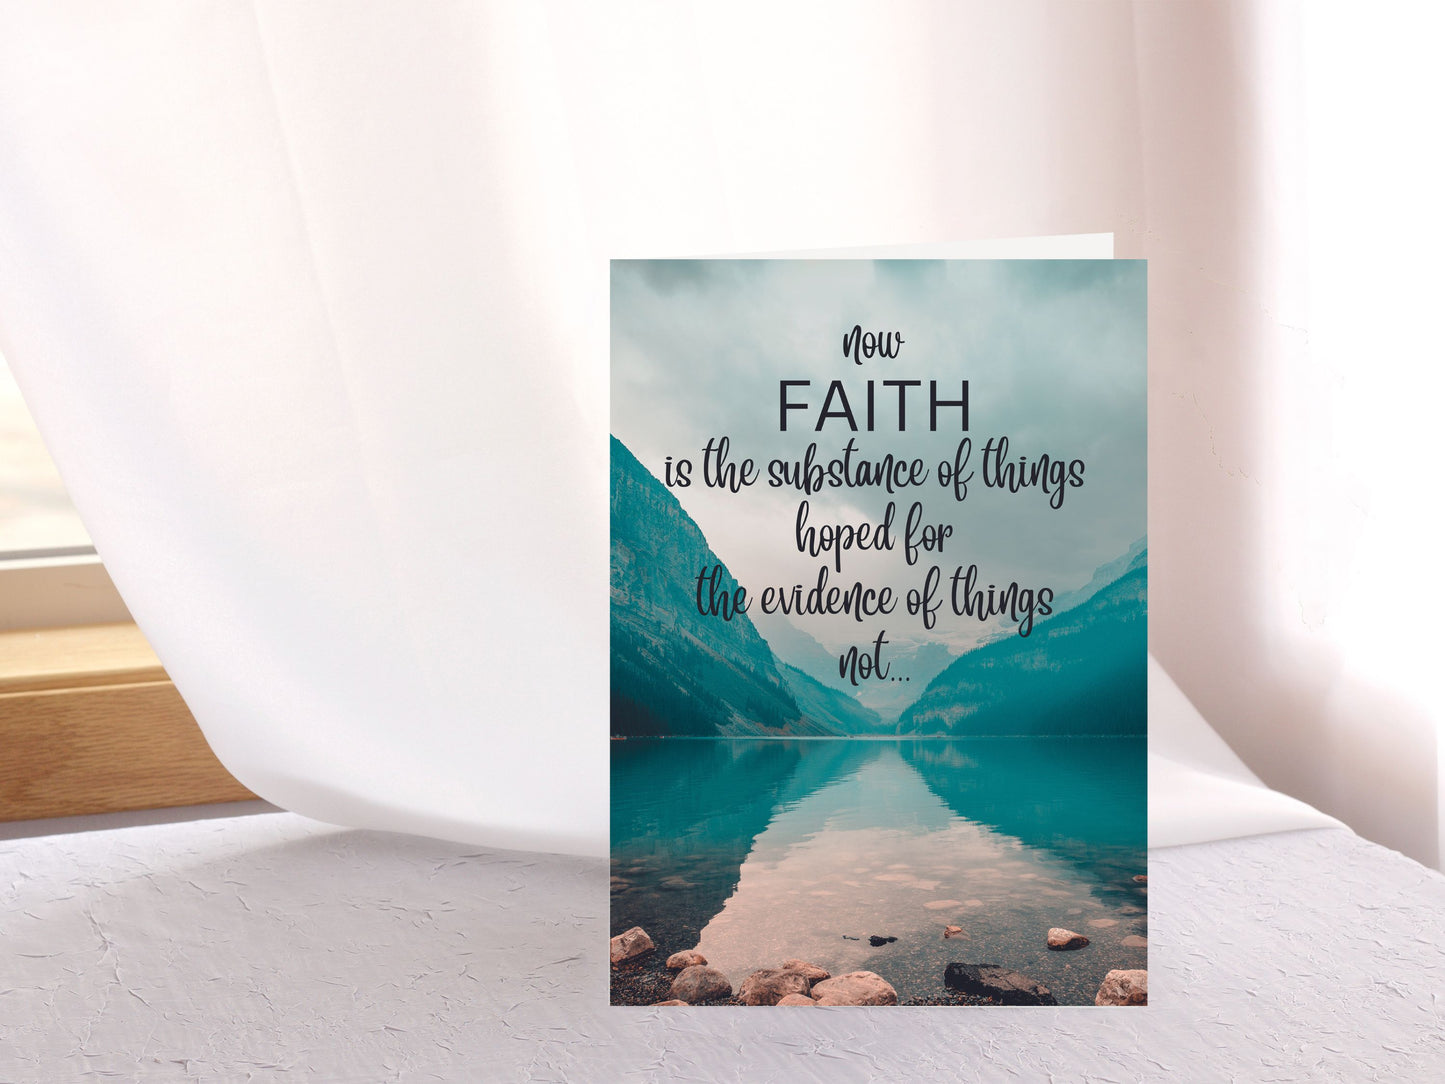 African American Religious Card| All Occasion Greeting Card For A Black Man or Woman| Thinking of You, Inspirational, Motivational Card For Him| Happy Birthday